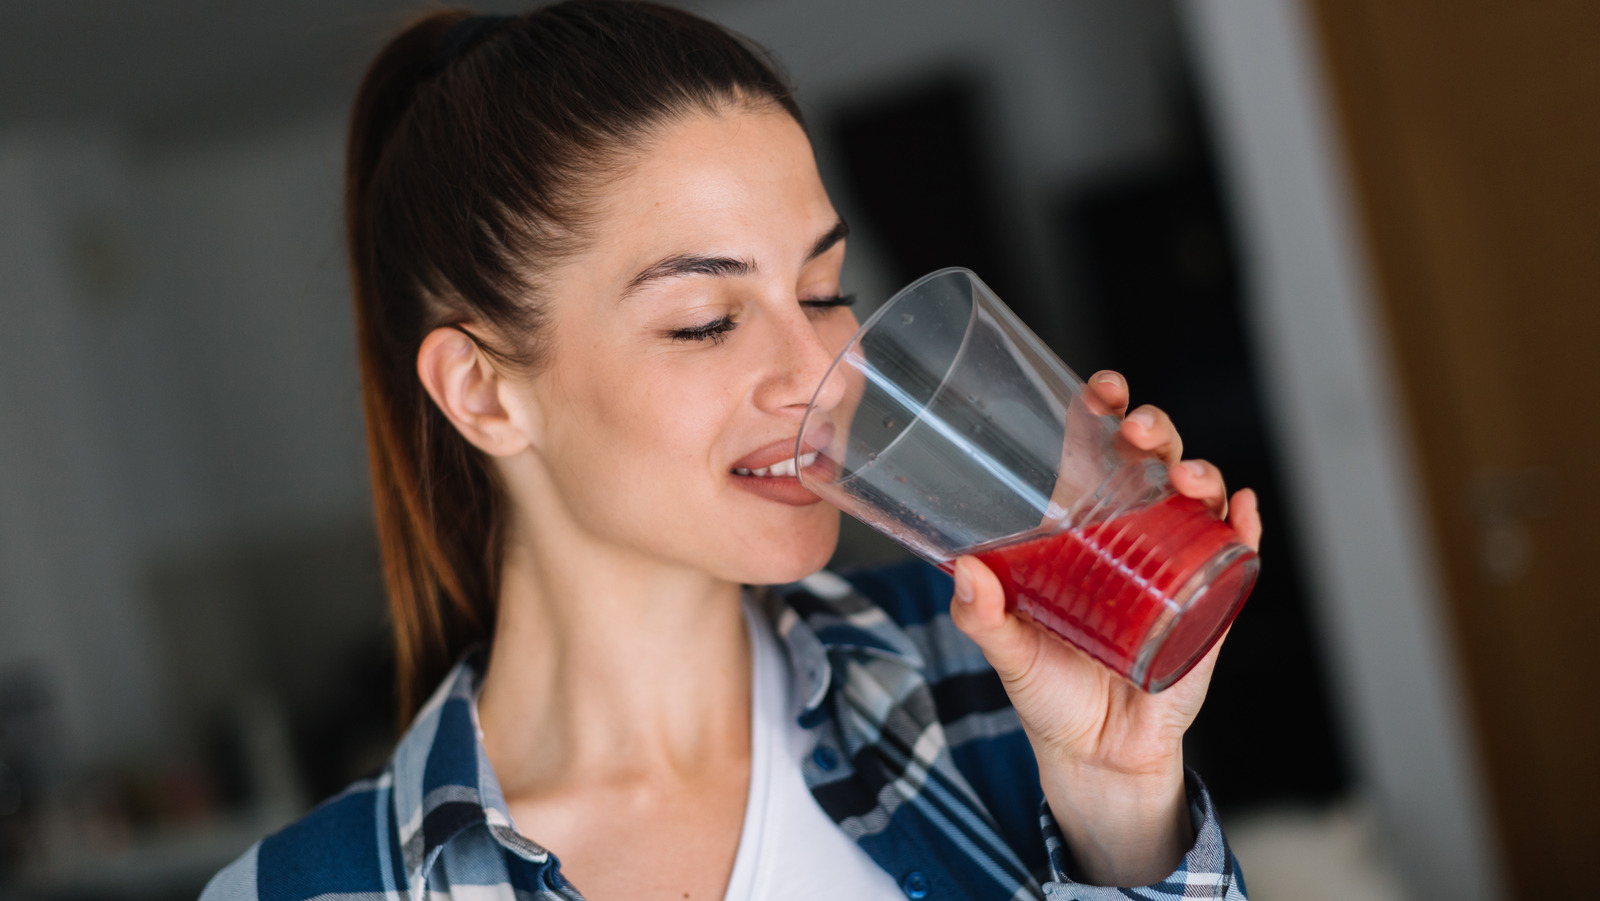 If You Don't Drink This Fruity Beverage, Your Early Death Risk Increases - Health Digest